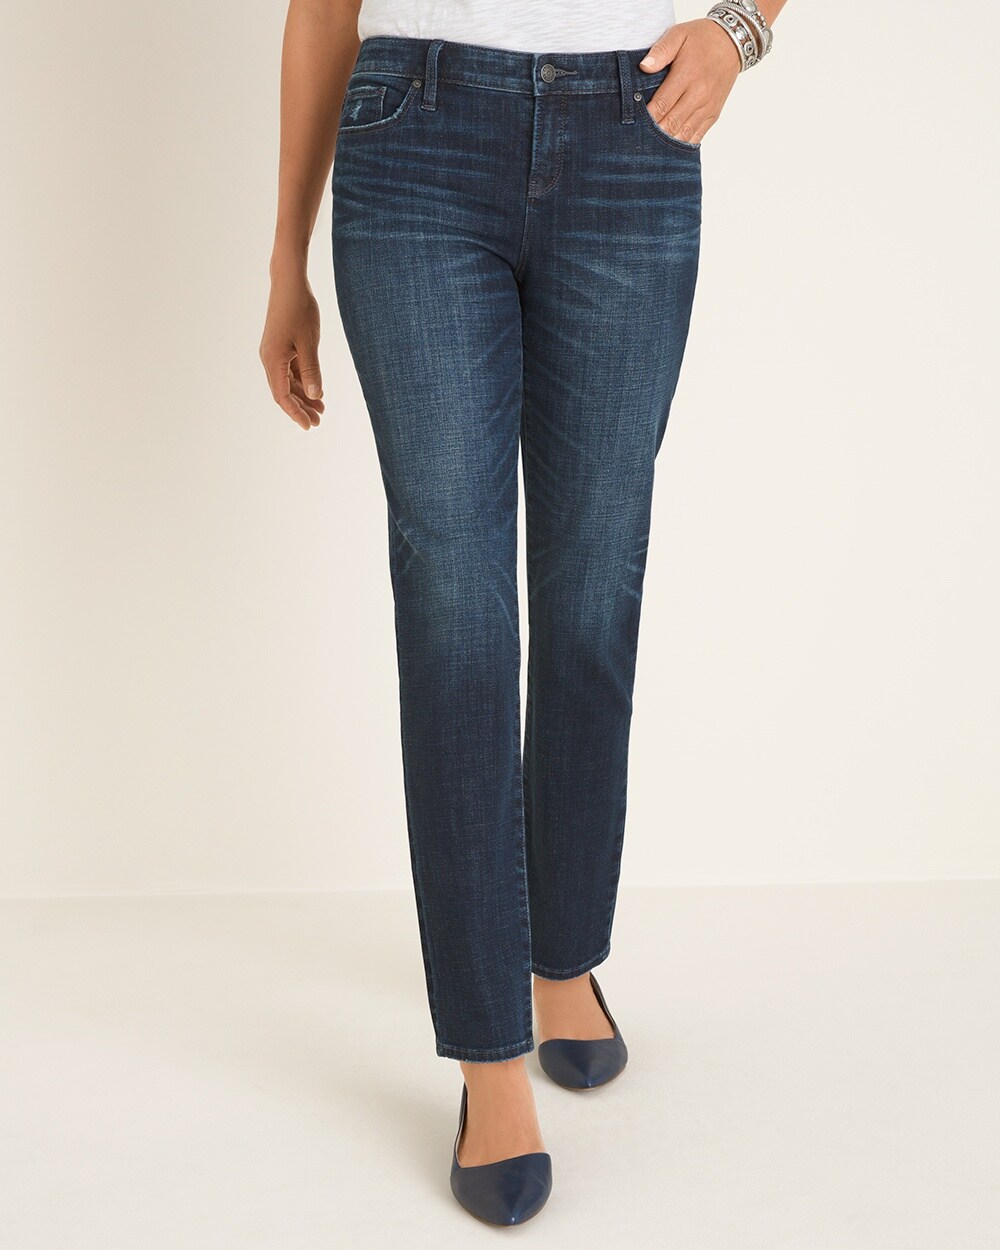 So Slimming Midrise Girlfriend Ankle Jeans